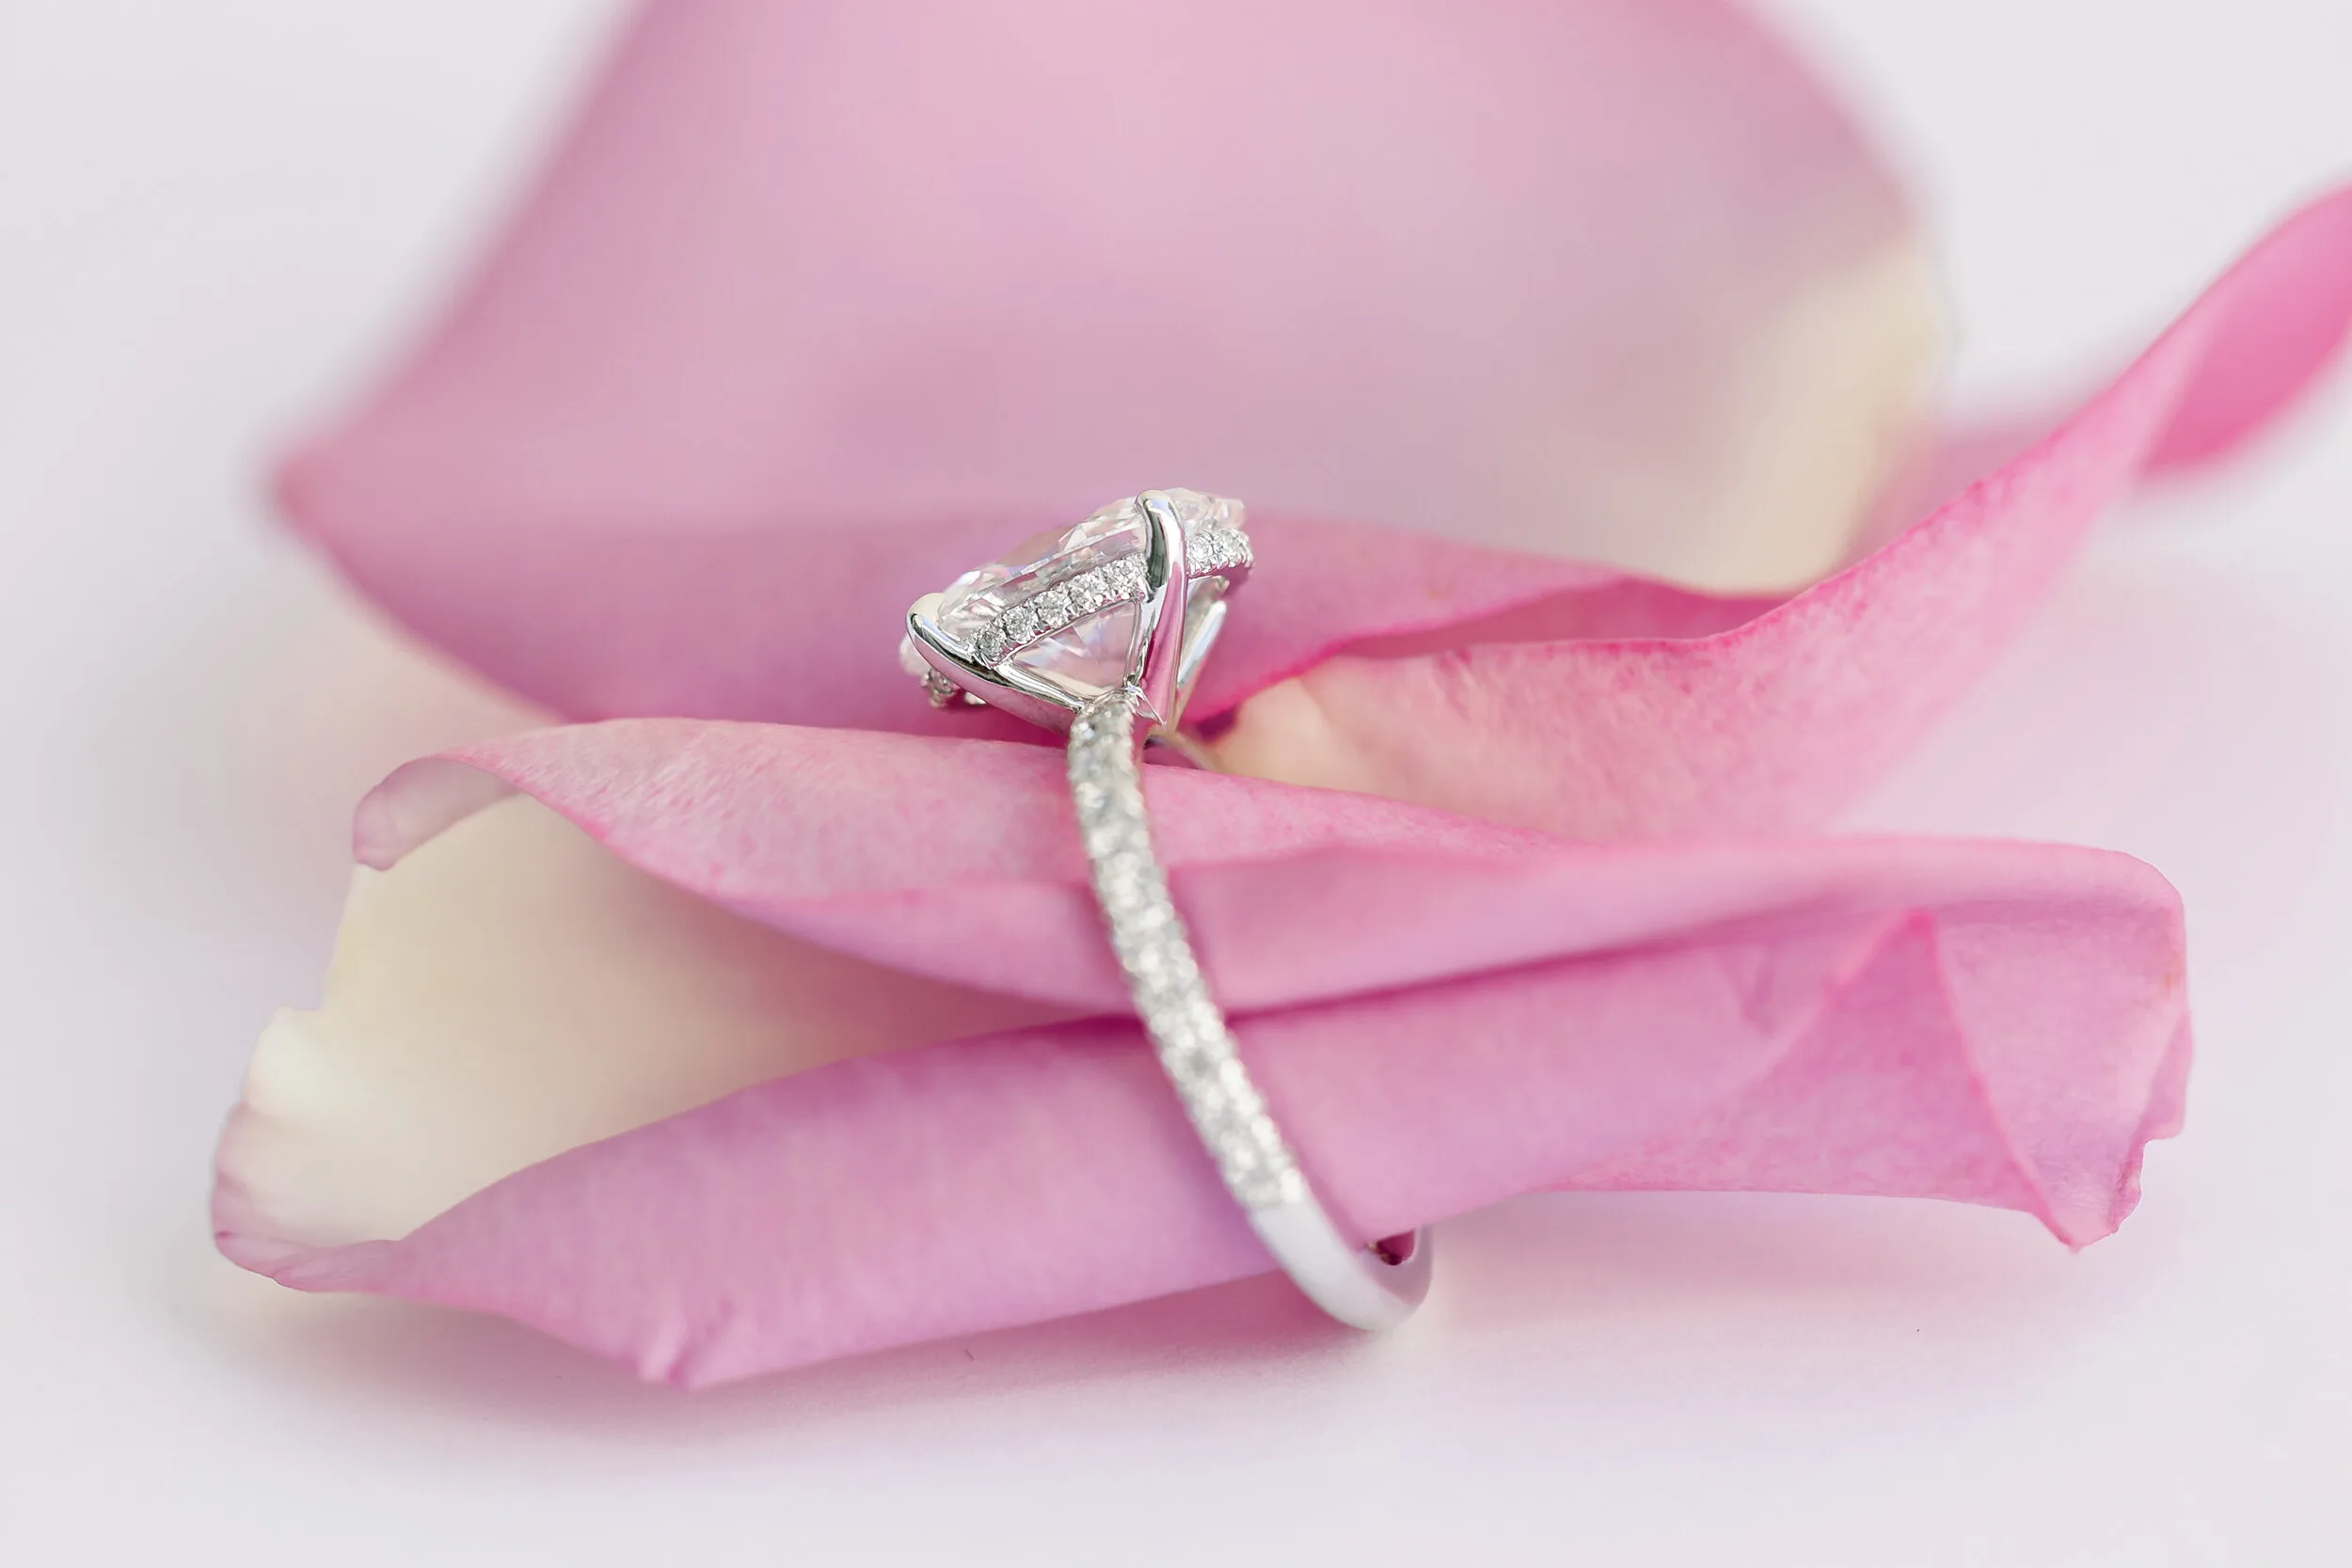 Custom Lab Diamond Engagement Rings How to Make It Your _Own_